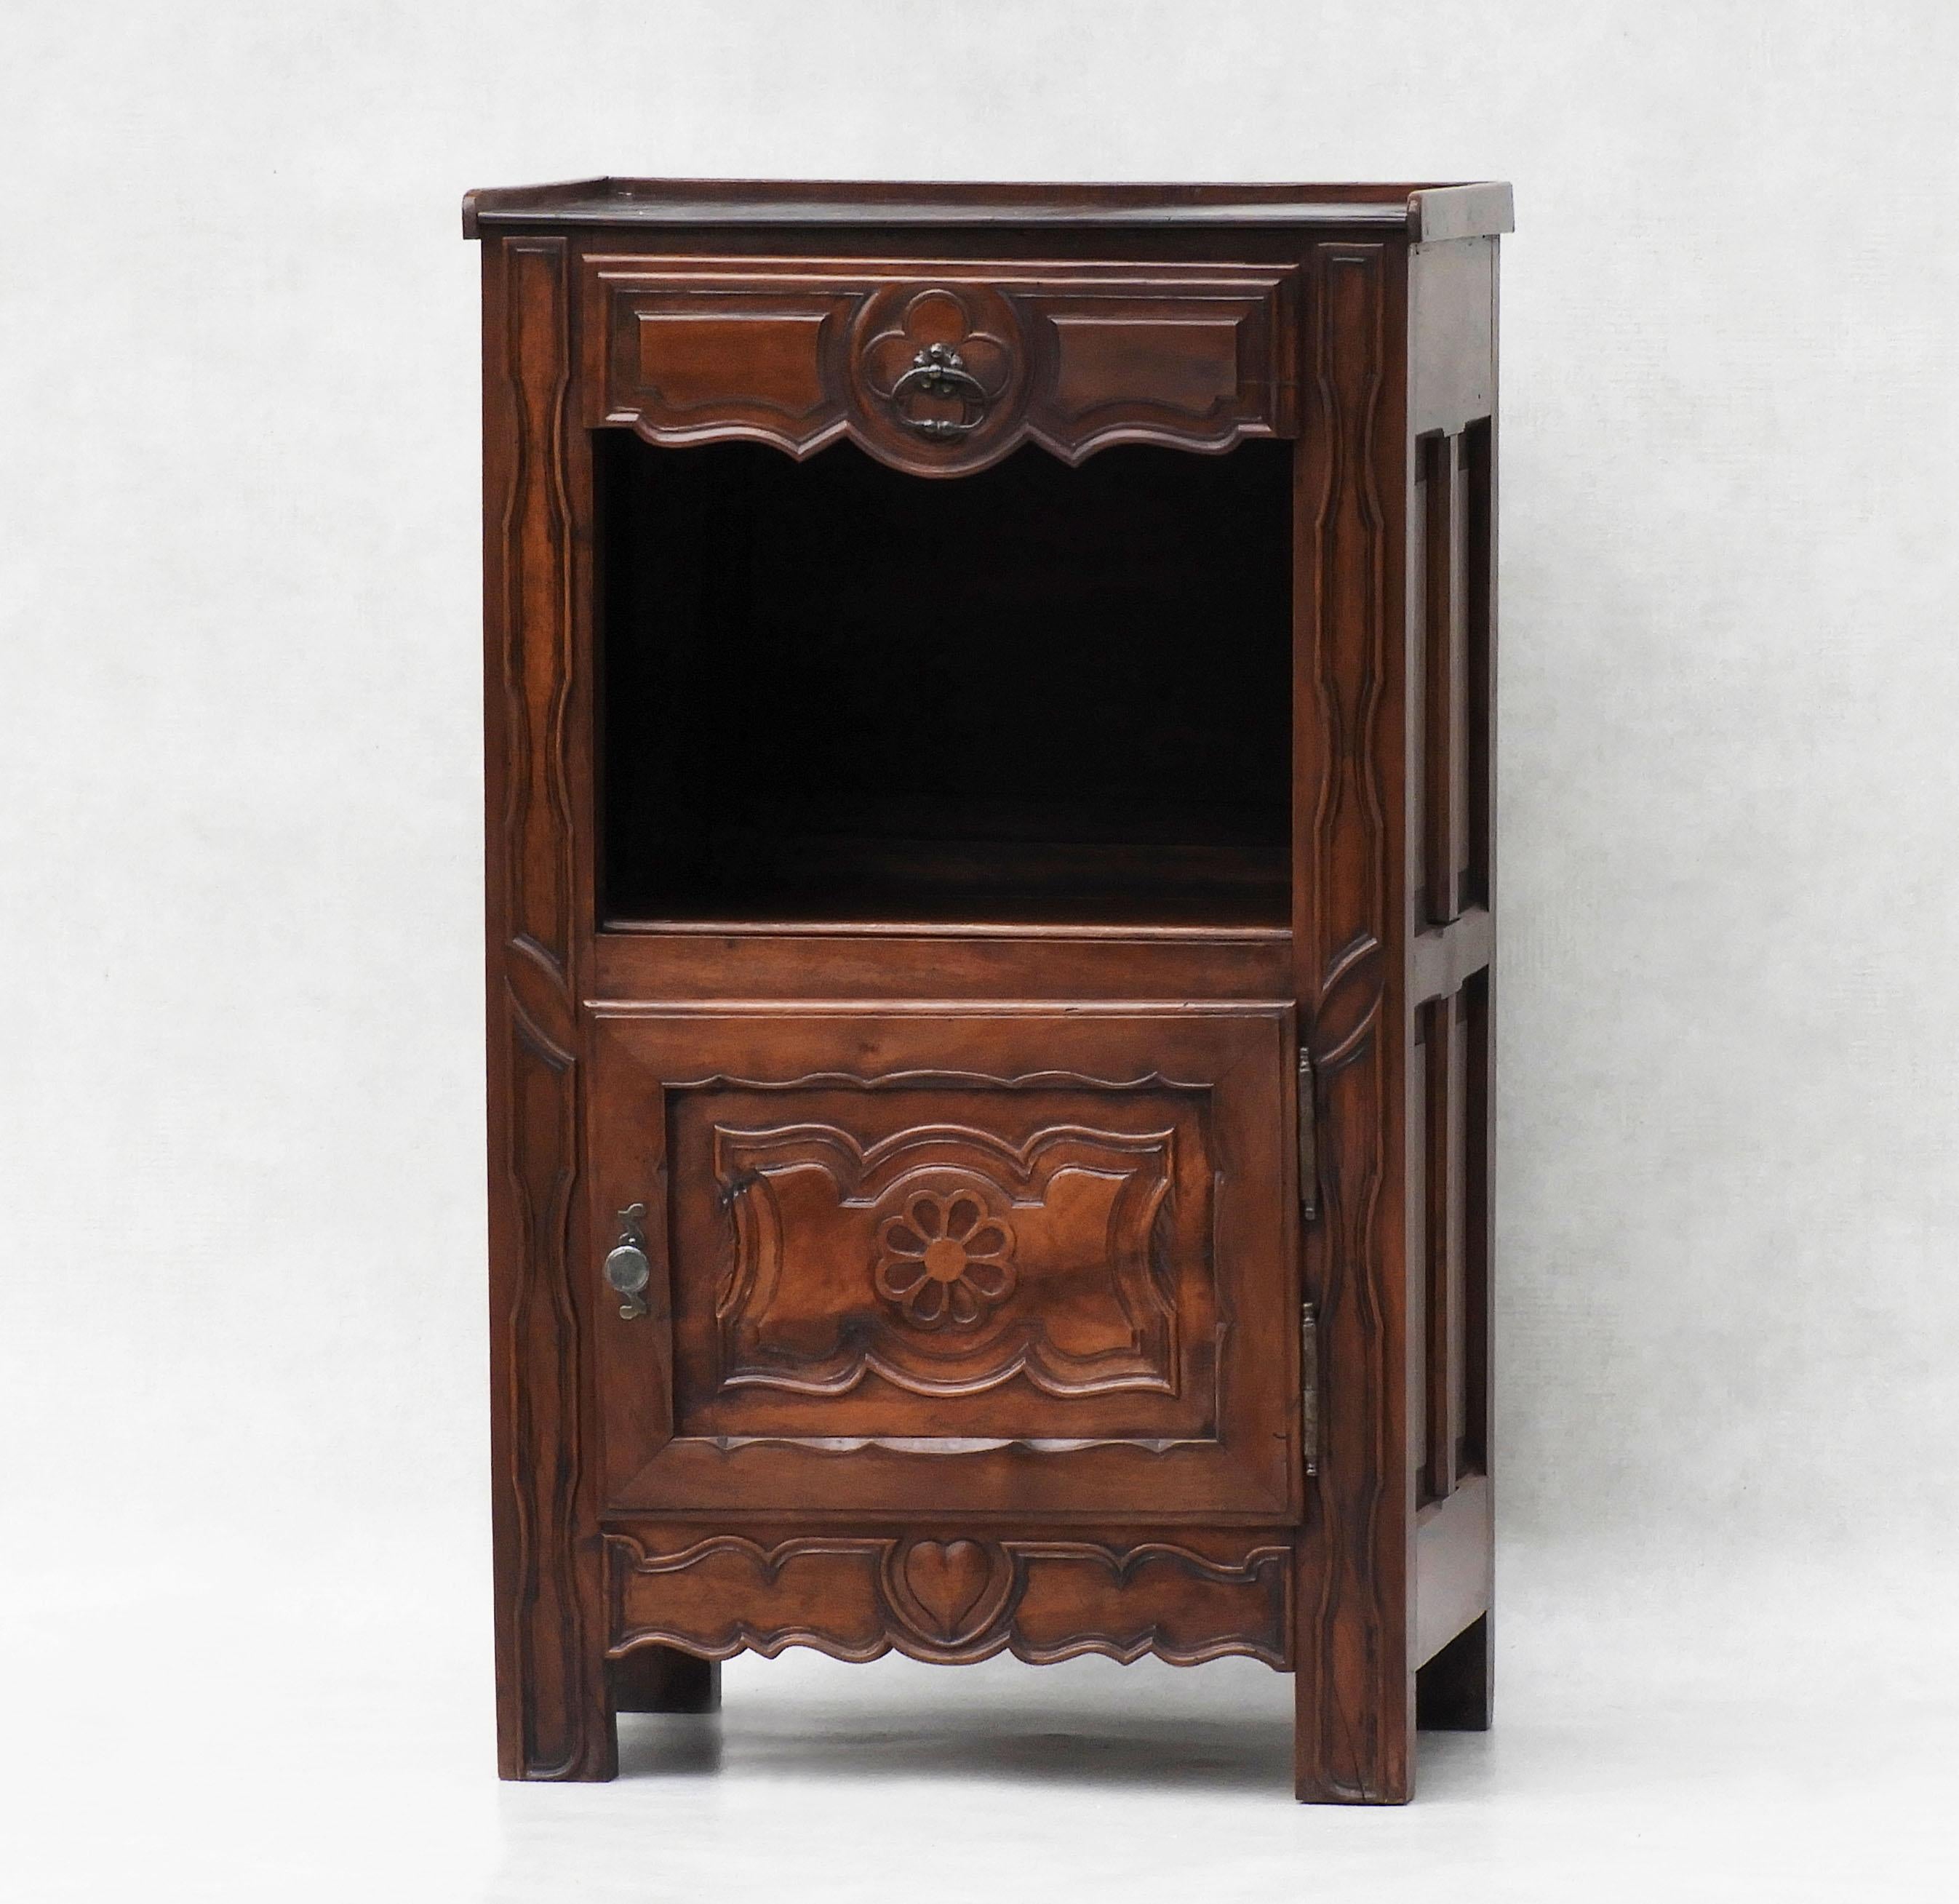 Provincial French walnut cabinet c1890


Provincial French walnut cabinet, circa 1890.

Beautiful one of a kind, walnut cabinet with panelled sides and charmingly decorated with heart and flower carvings.
Spacious and practical featuring a drawer, a